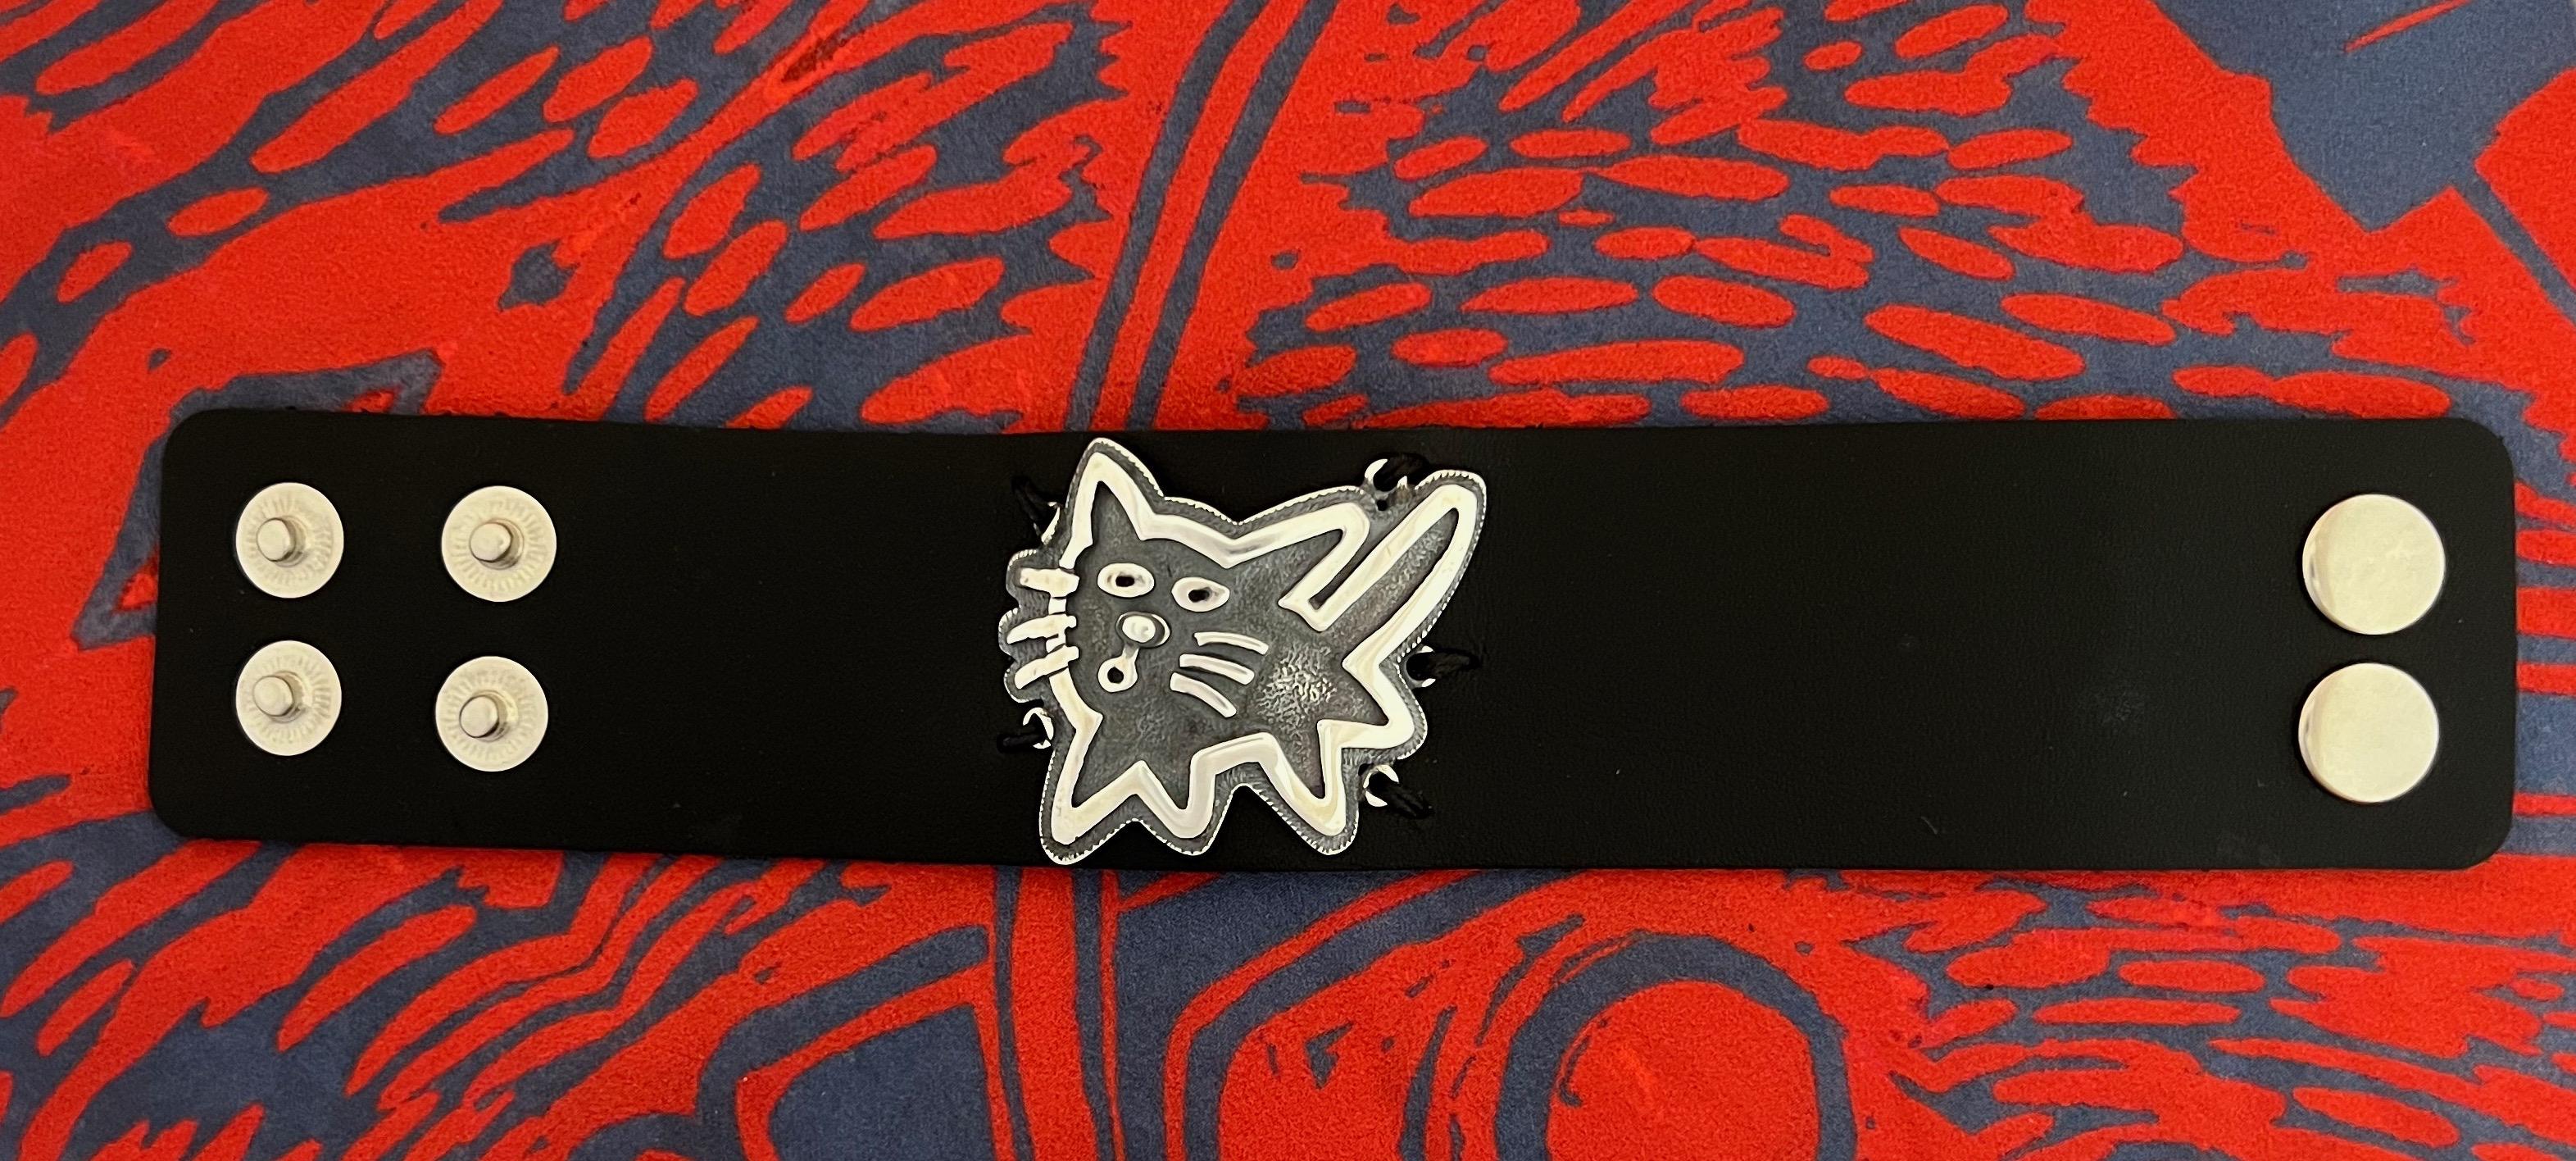 Adjustable Kitty leather cuff by Melanie Yazzie, black leather, Sterling Silver

Melanie A. Yazzie (Navajo-Diné) is a highly regarded multimedia artist known for her printmaking, paintings, sculpture, and jewelry designs. She has exhibited,